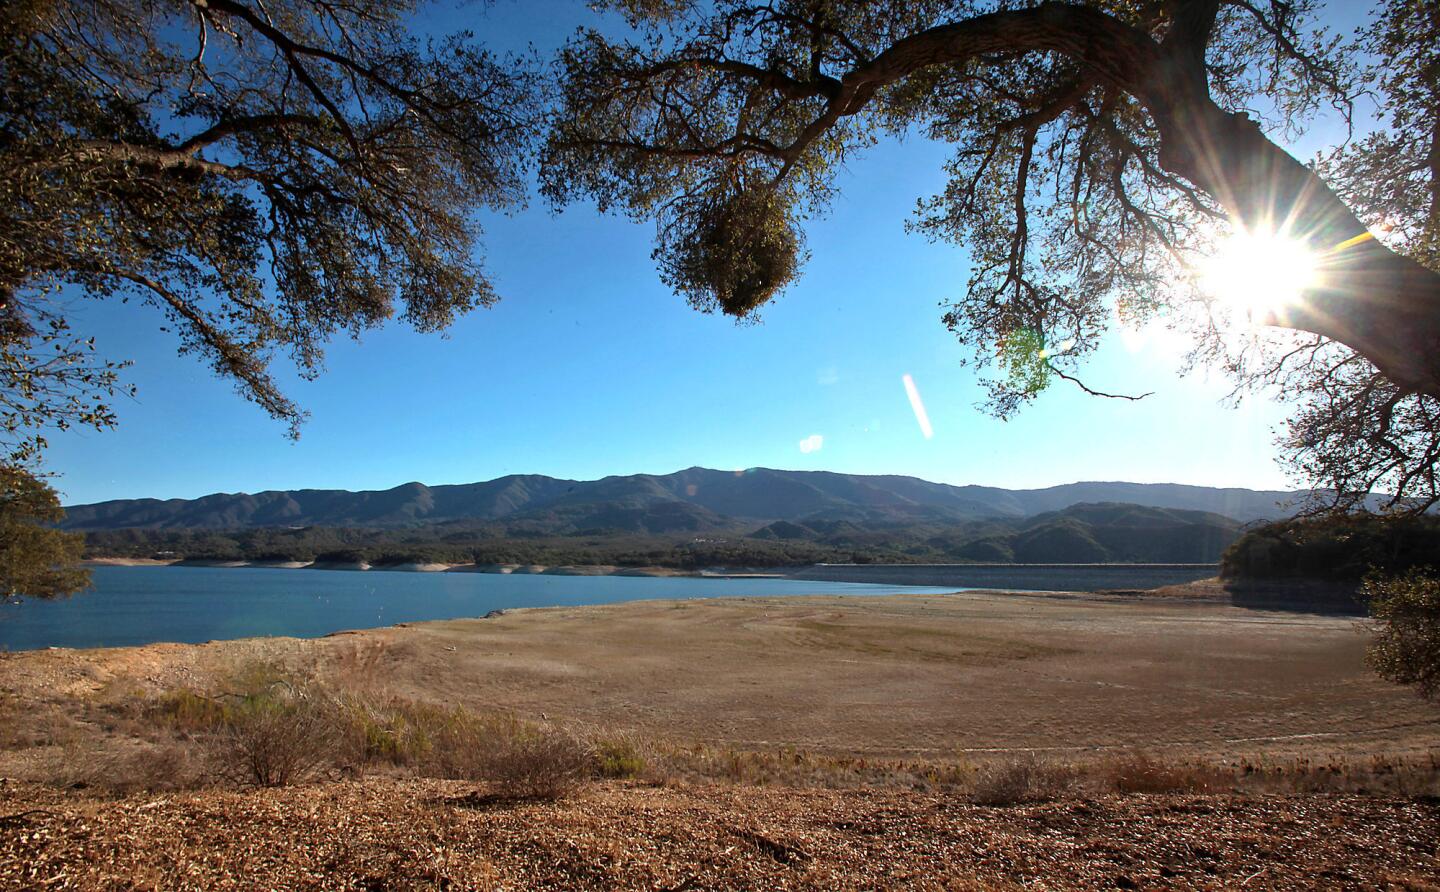 Cachuma Lake's previous shoreline is brown and dry as the water level continues to drop because of sustained drought conditions.